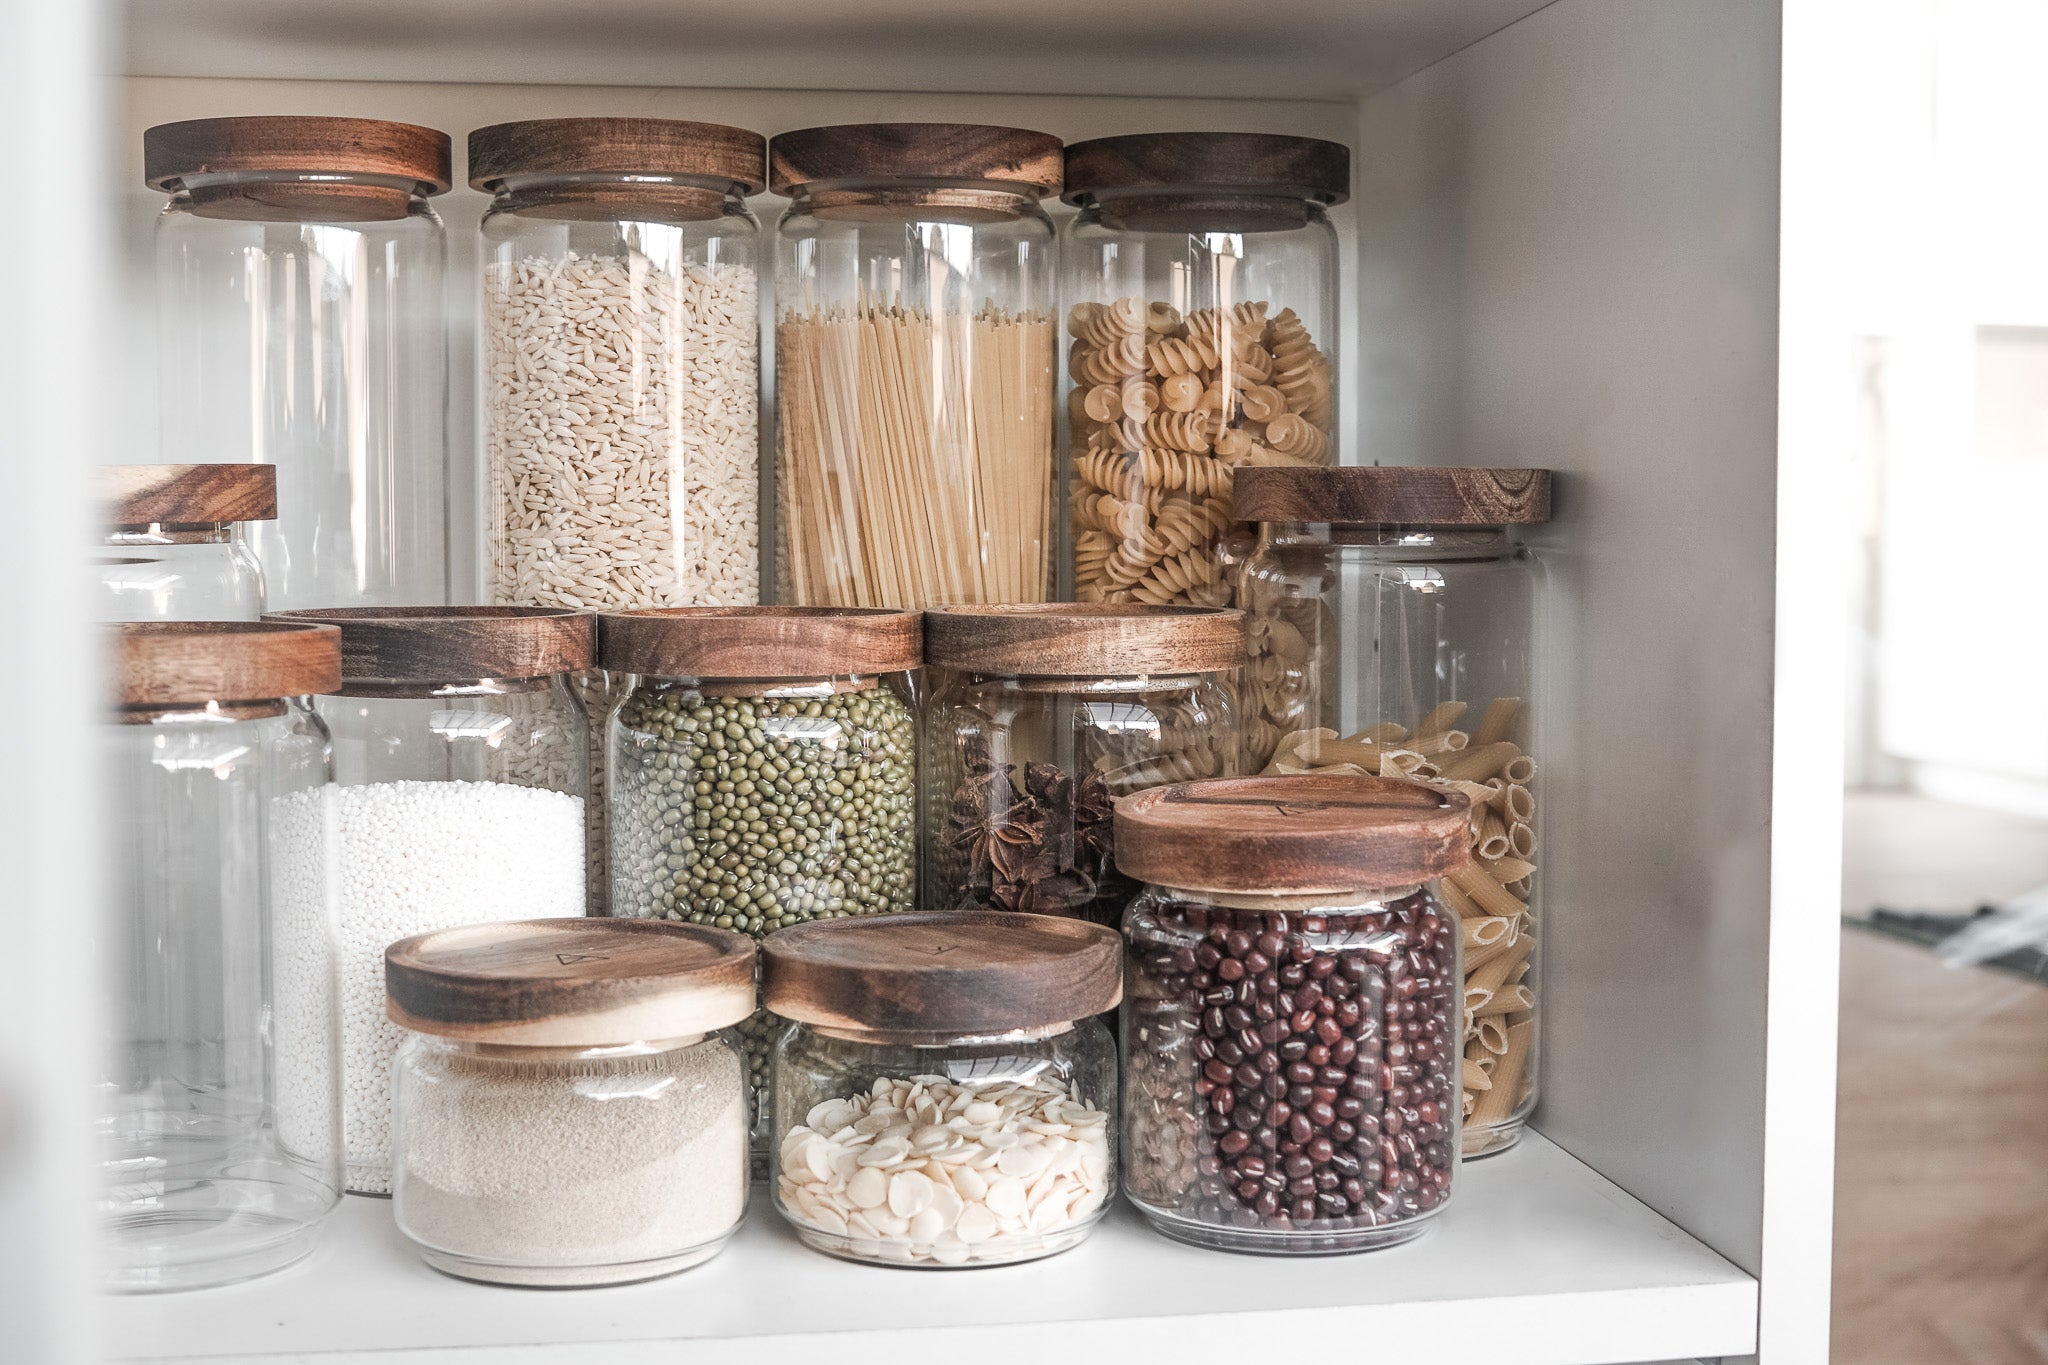 Our RUUM-y Pantry Jars comes in 6 sizes